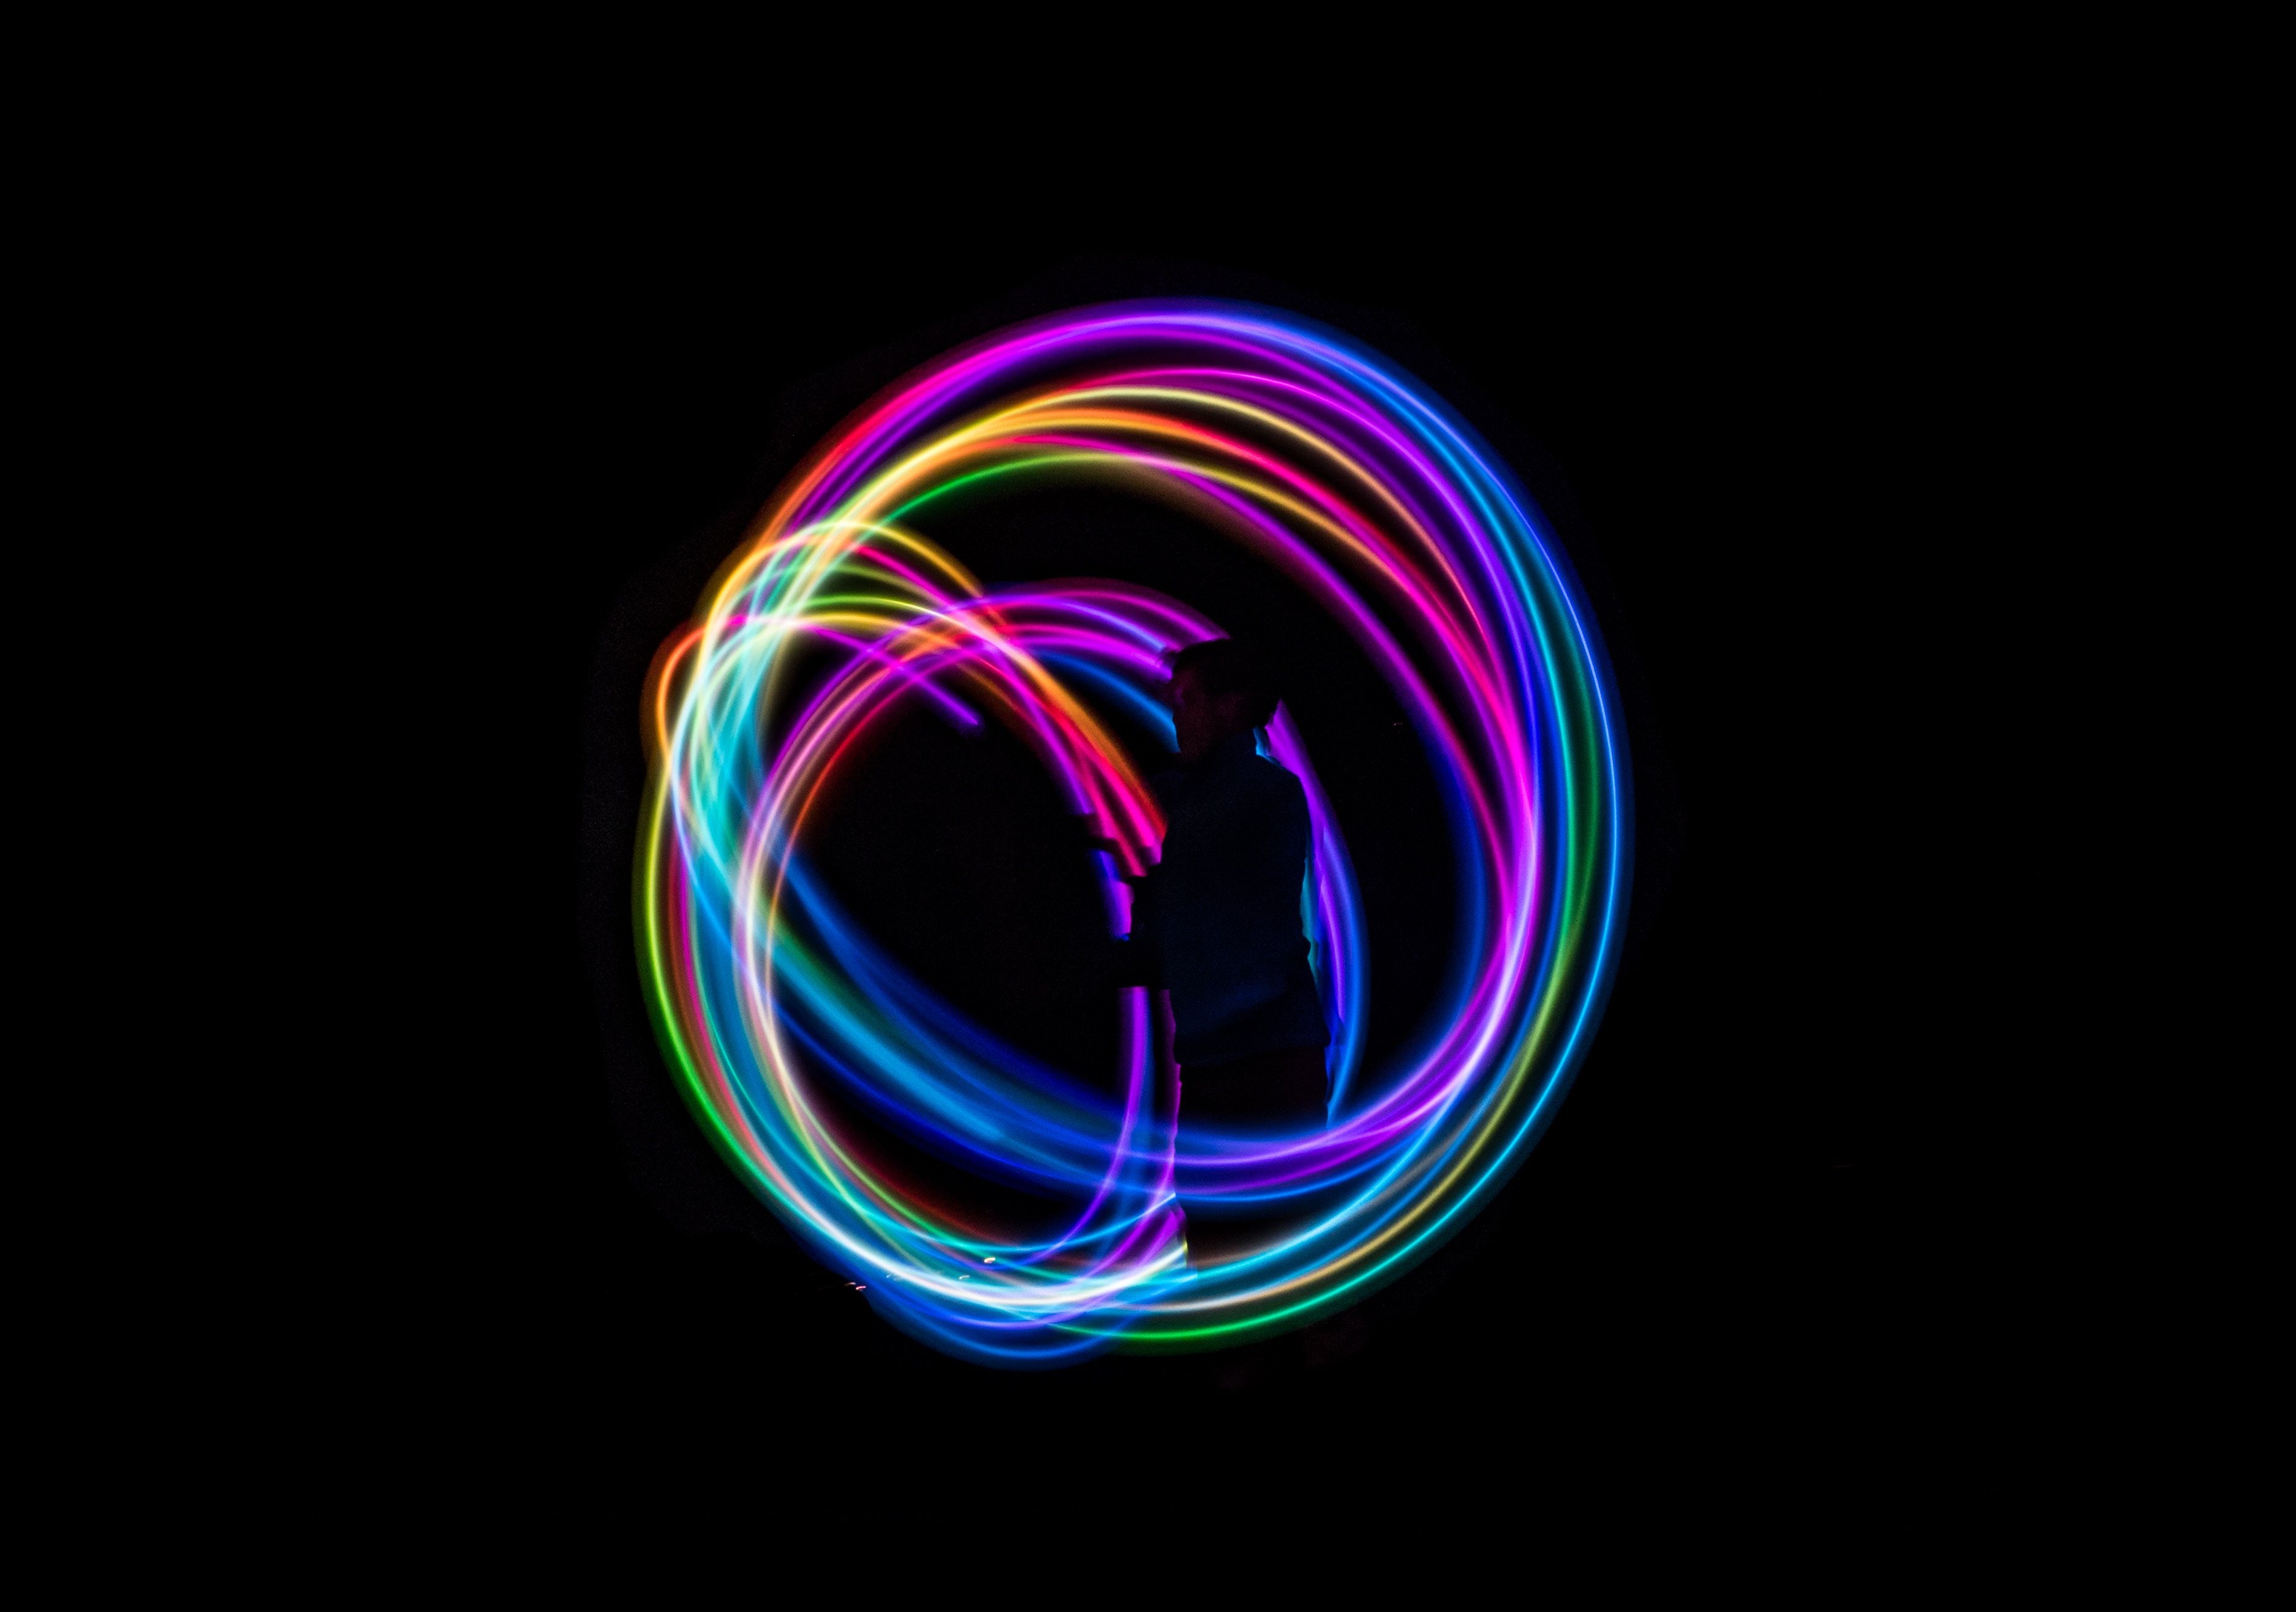 3748x2632 #led, #light trail, #illuminated, #oled, #Free picture, #light, #silhouette, #long exposure, #glowing, #black, #neon, #dark, #apple, #rainbow, #glow, #night, #mac, #colors, #color, #draw, #person. Mocah HD Wallpaper